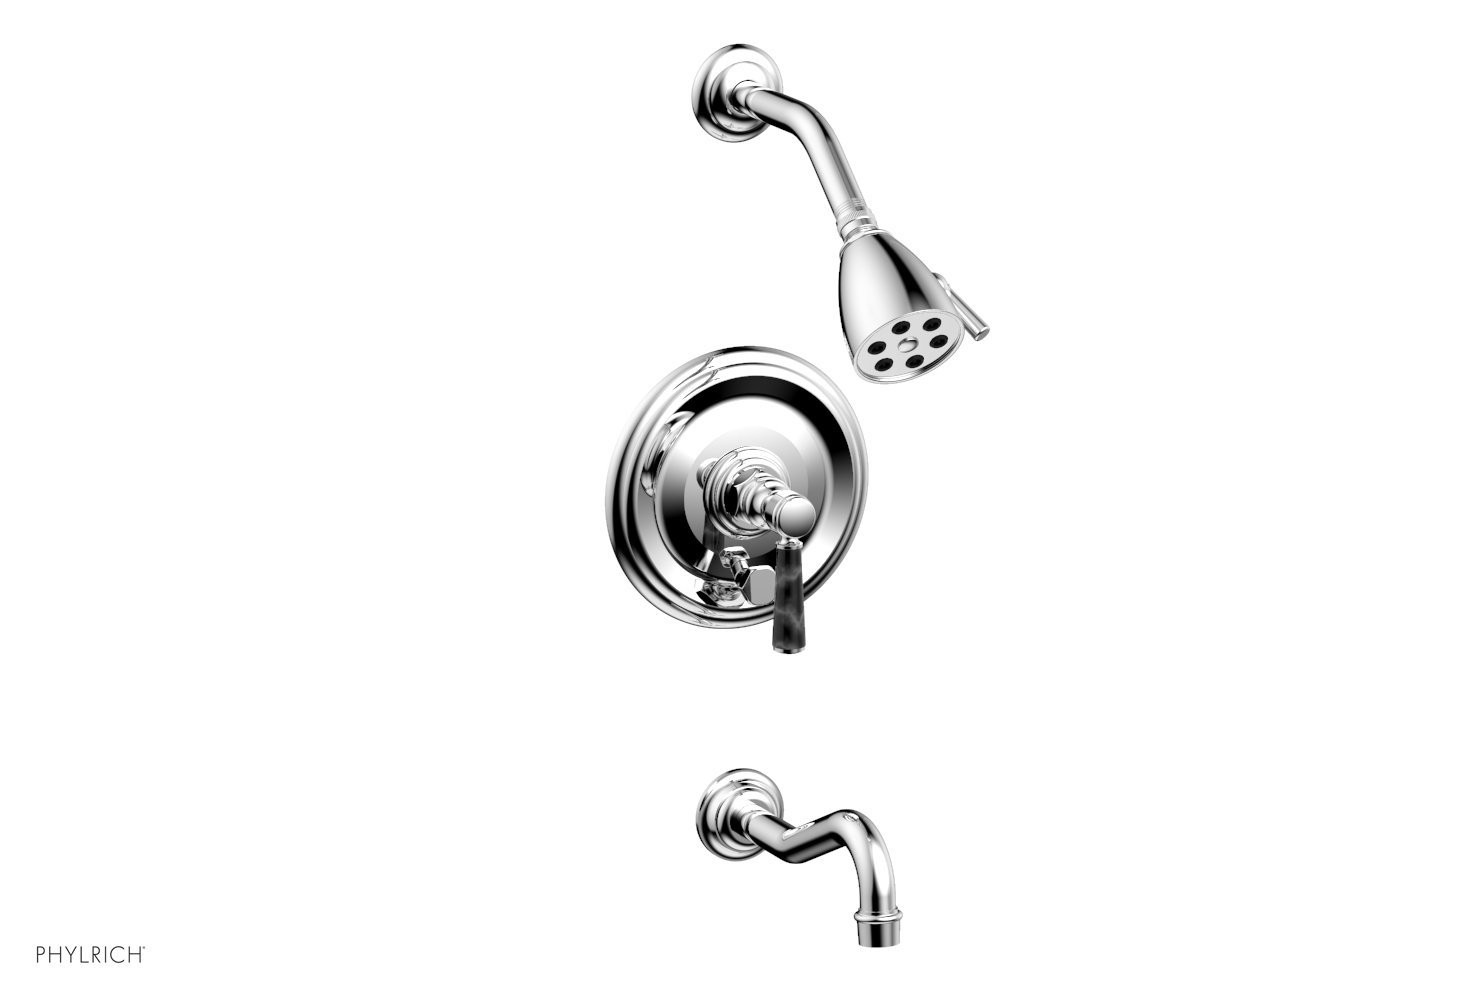 PHYLRICH 161-28-030 HENRI WALL MOUNT PRESSURE BALANCE TUB AND SHOWER SET WITH BLACK MARBLE LEVER HANDLE